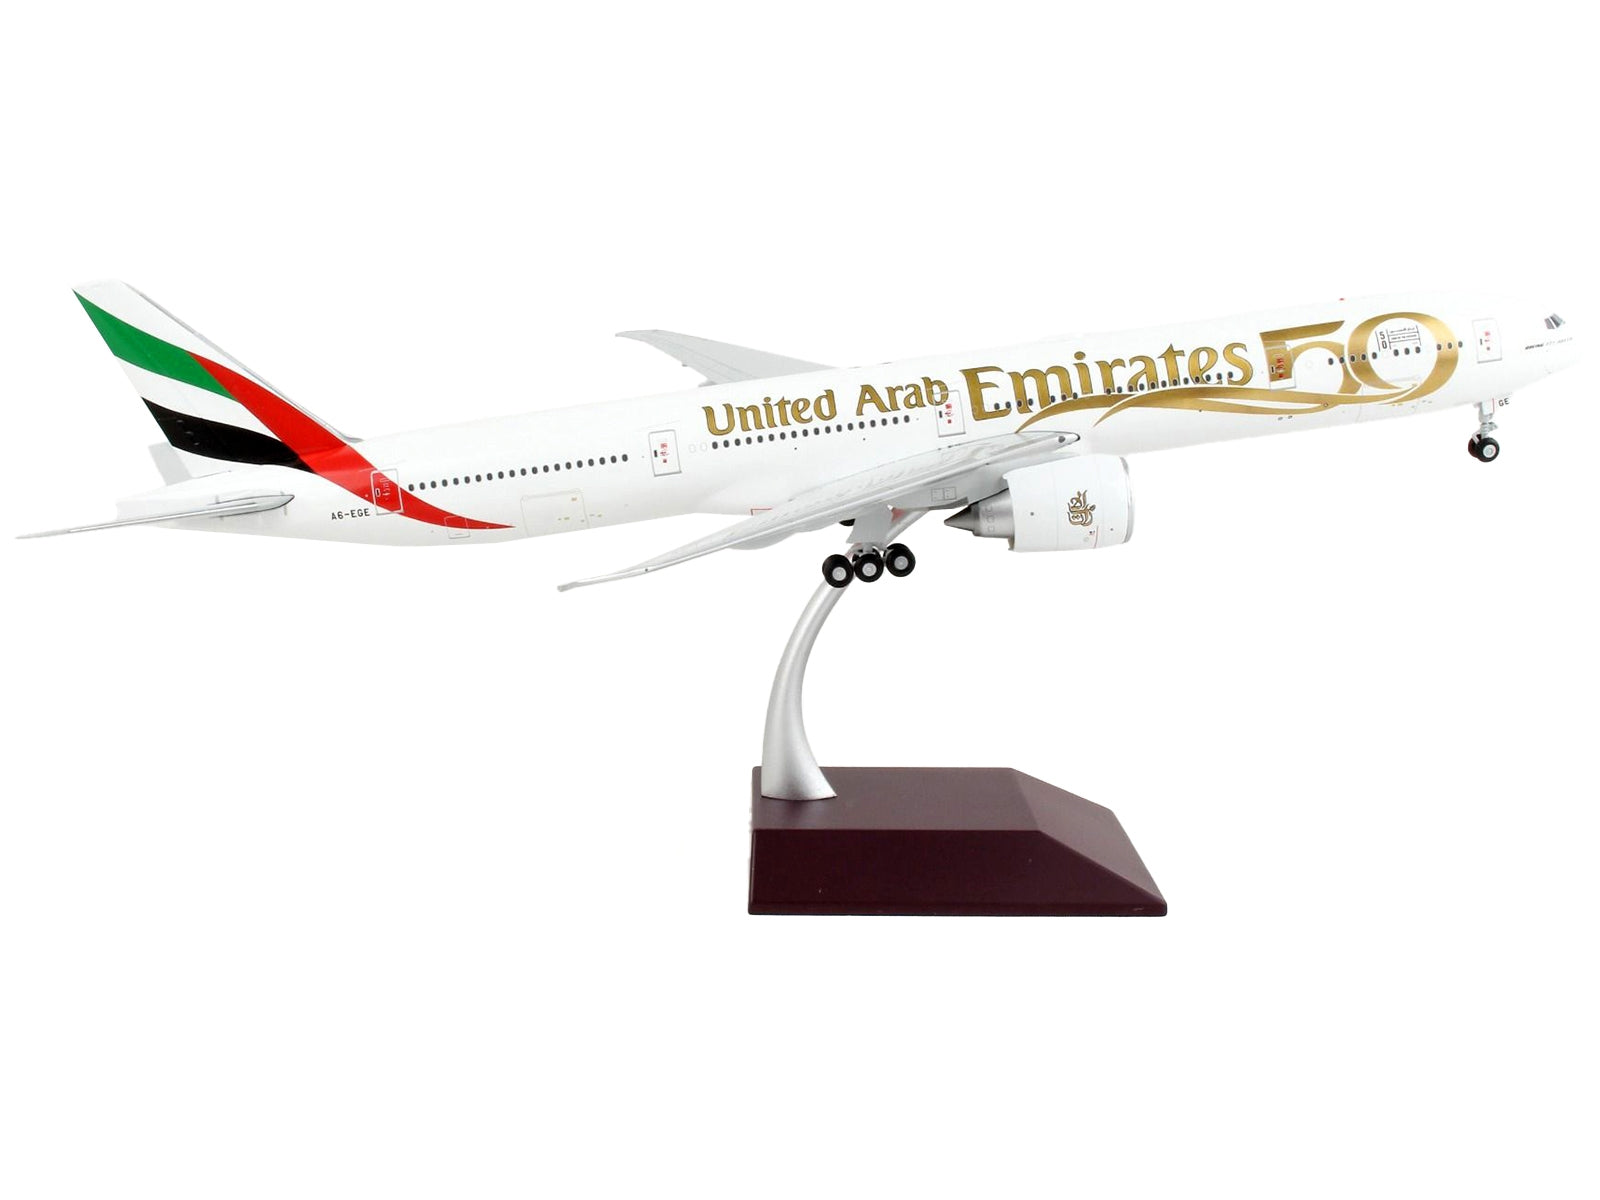 Boeing 777-300ER Commercial Aircraft "Emirates Airlines - 50th Anniversary of UAE" White with Striped Tail "Gemini 200" Series 1/200 Diecast Model Airplane by GeminiJets